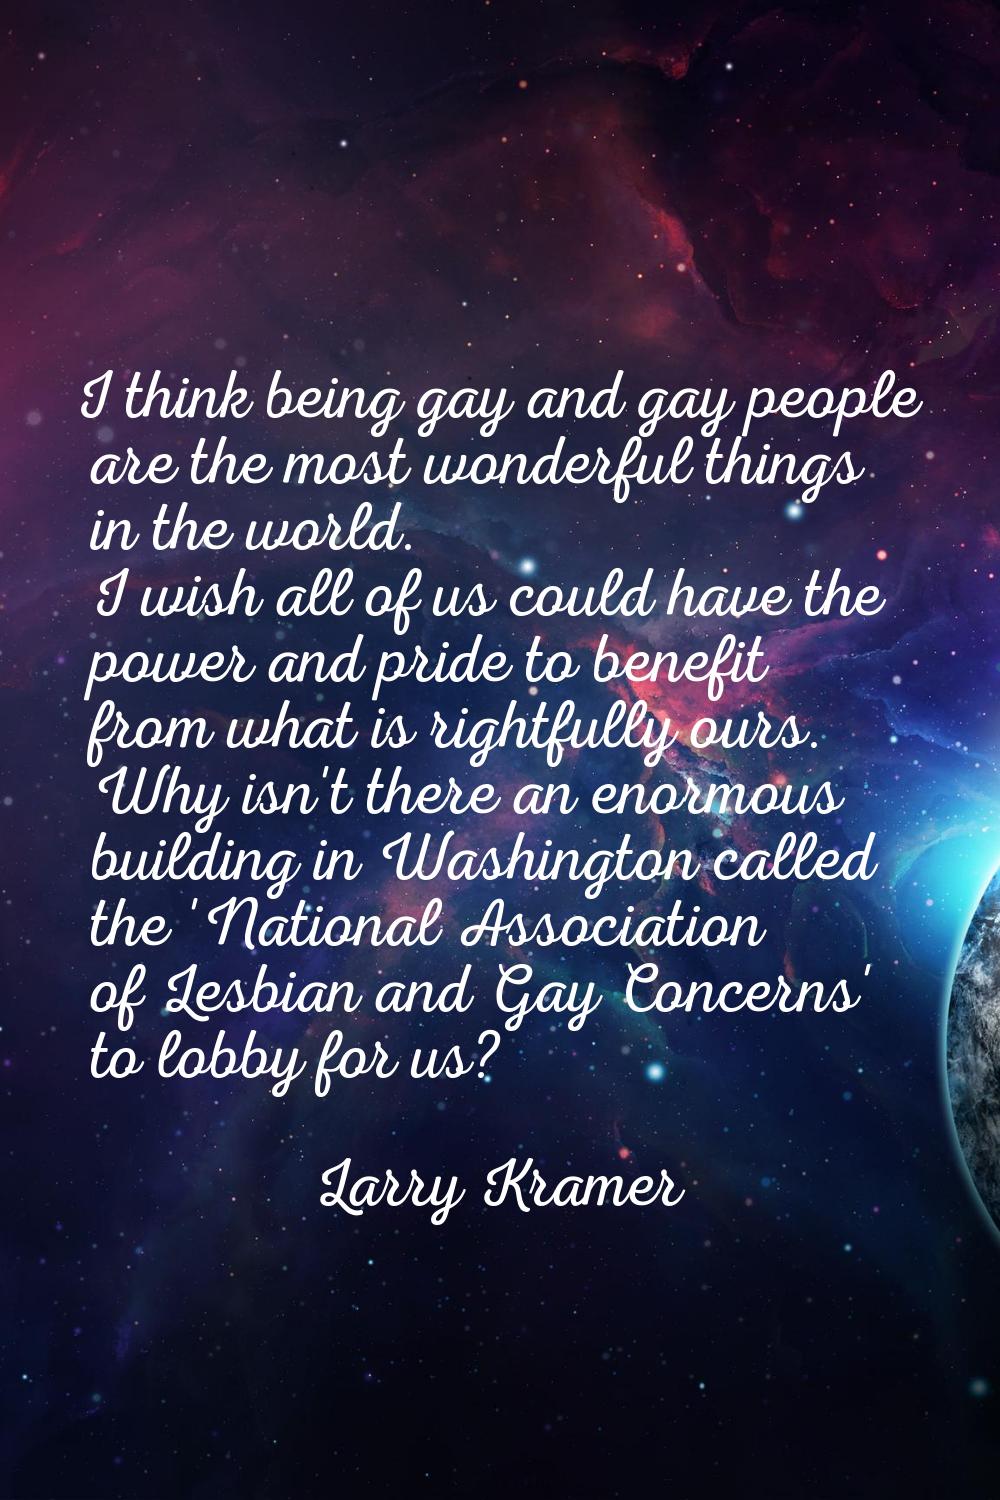 I think being gay and gay people are the most wonderful things in the world. I wish all of us could